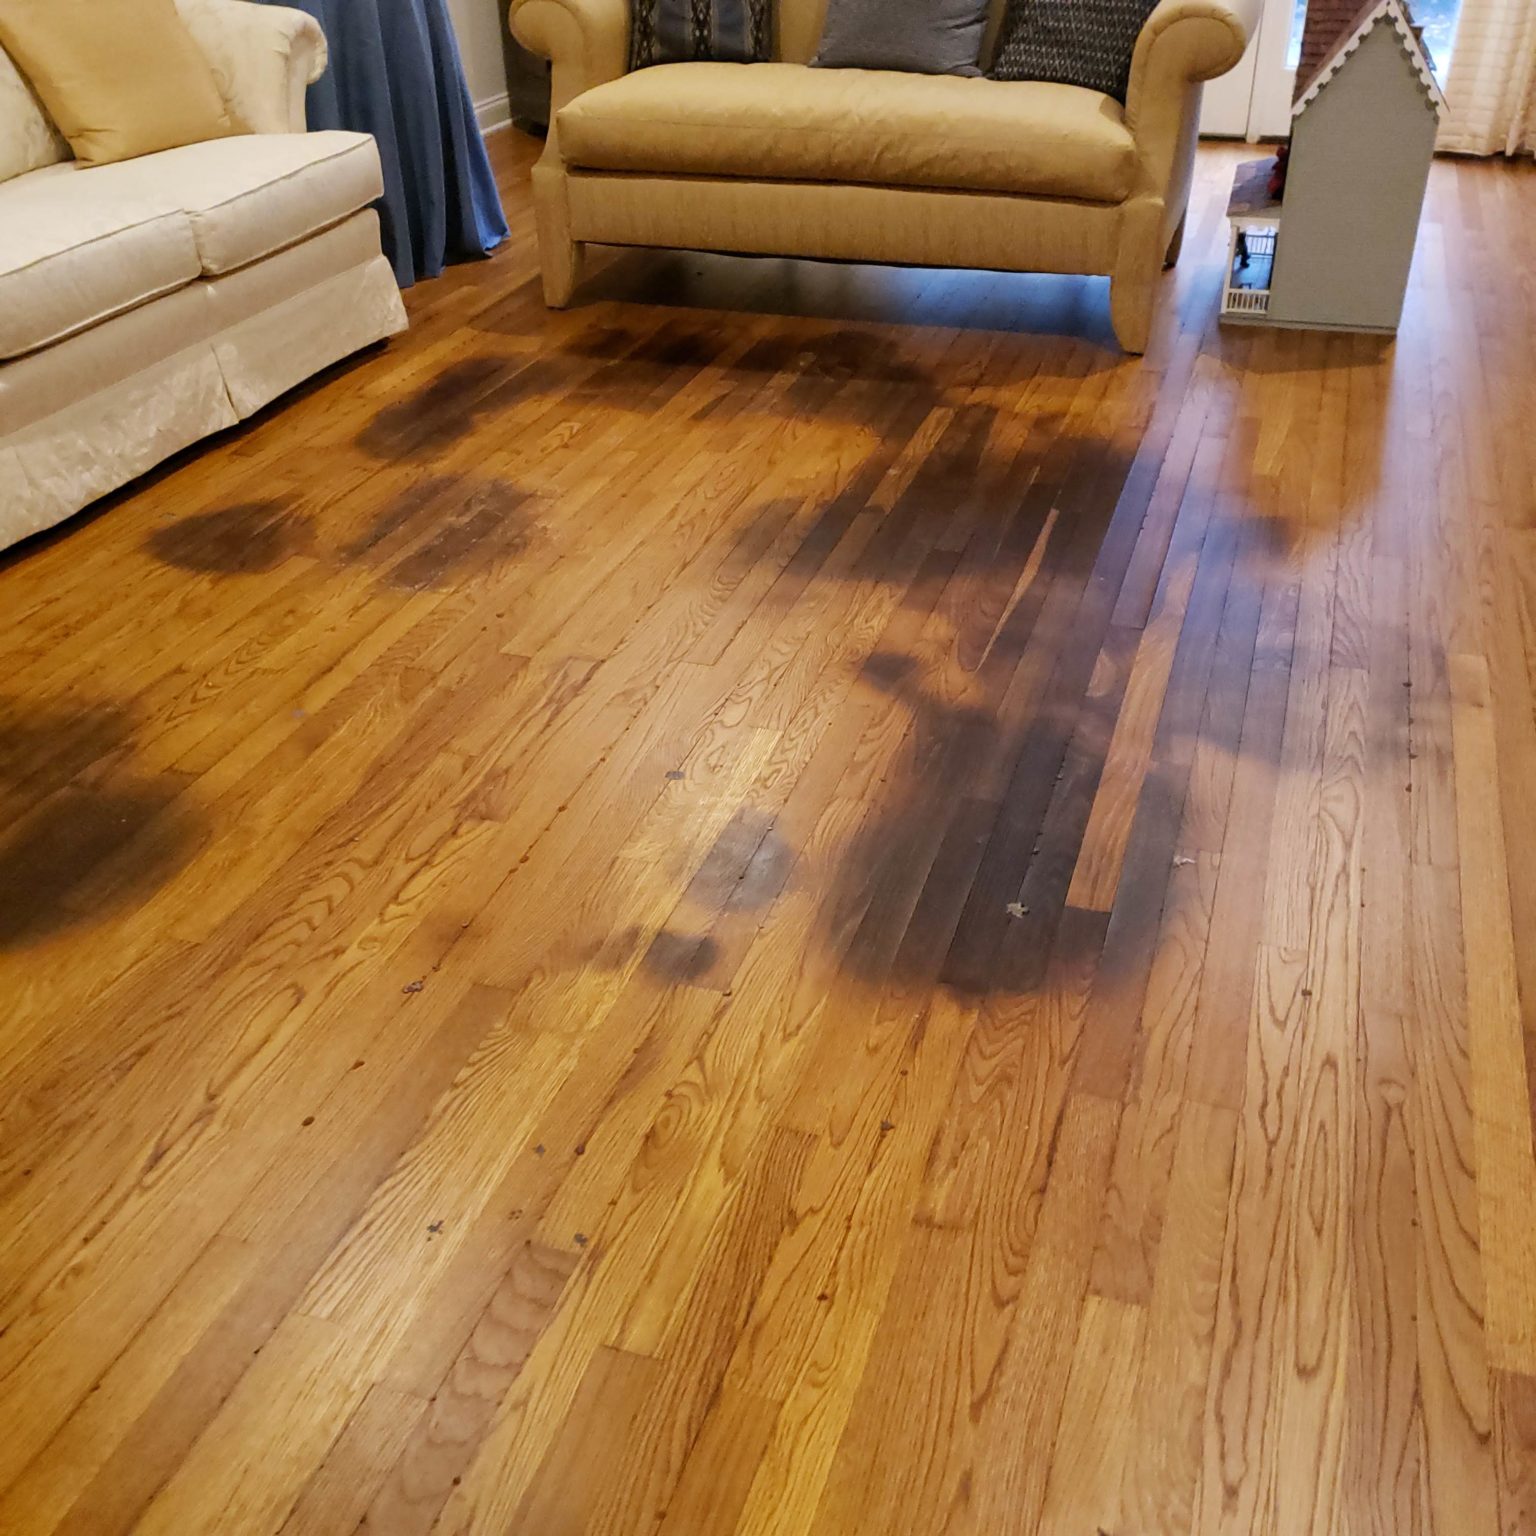 Refinishing Hardwood Floors With Pet Stains - Options for Fixing